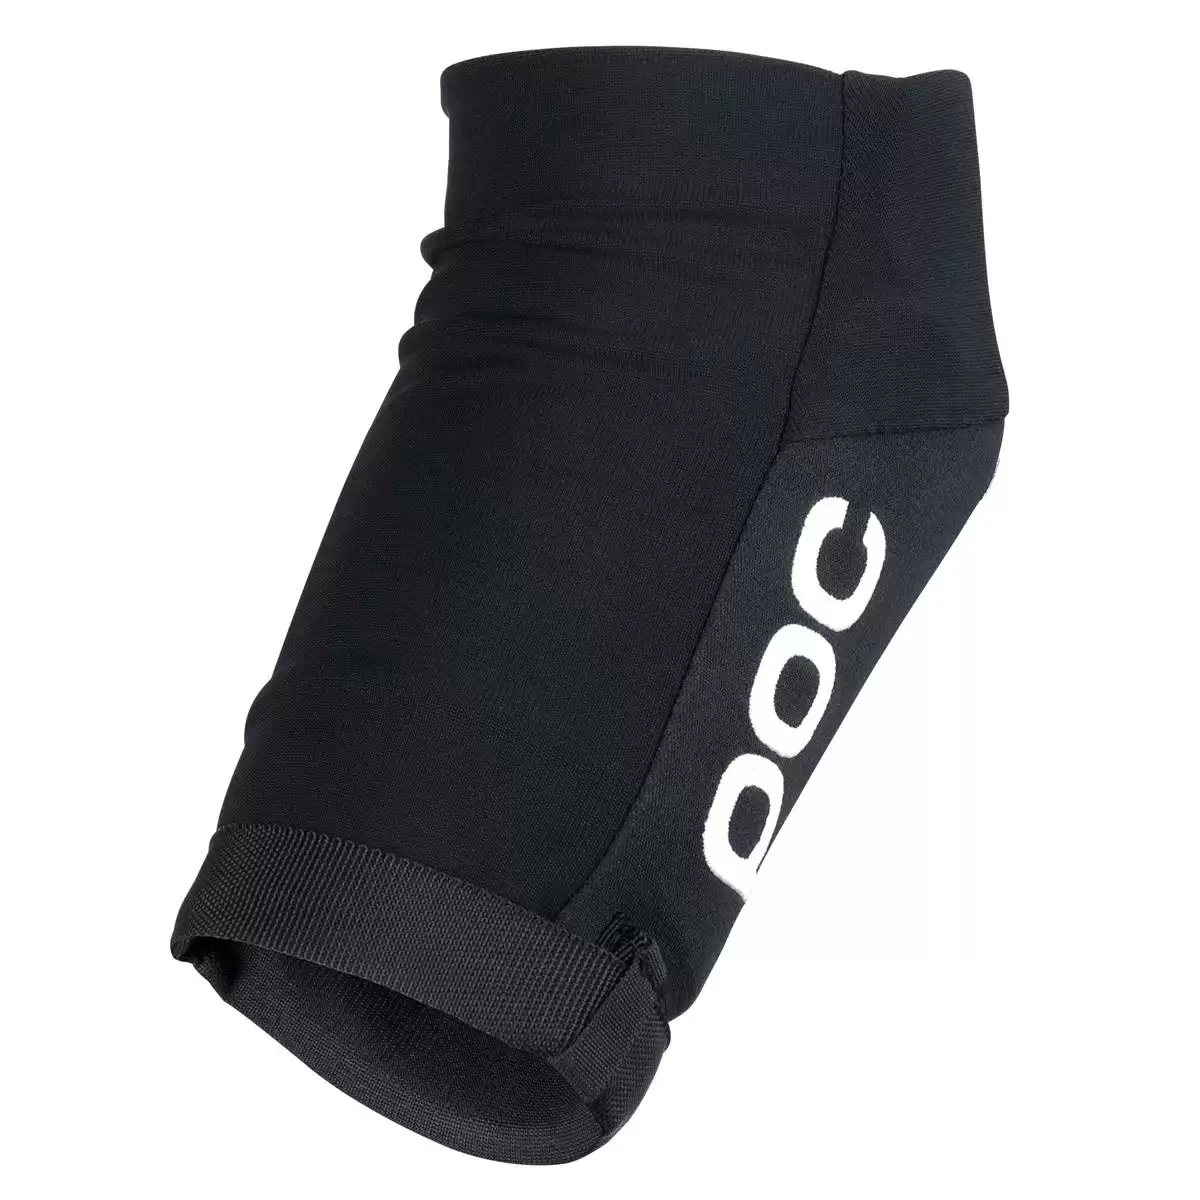 Joint VPD Air Elbow pads Black Size XL #3